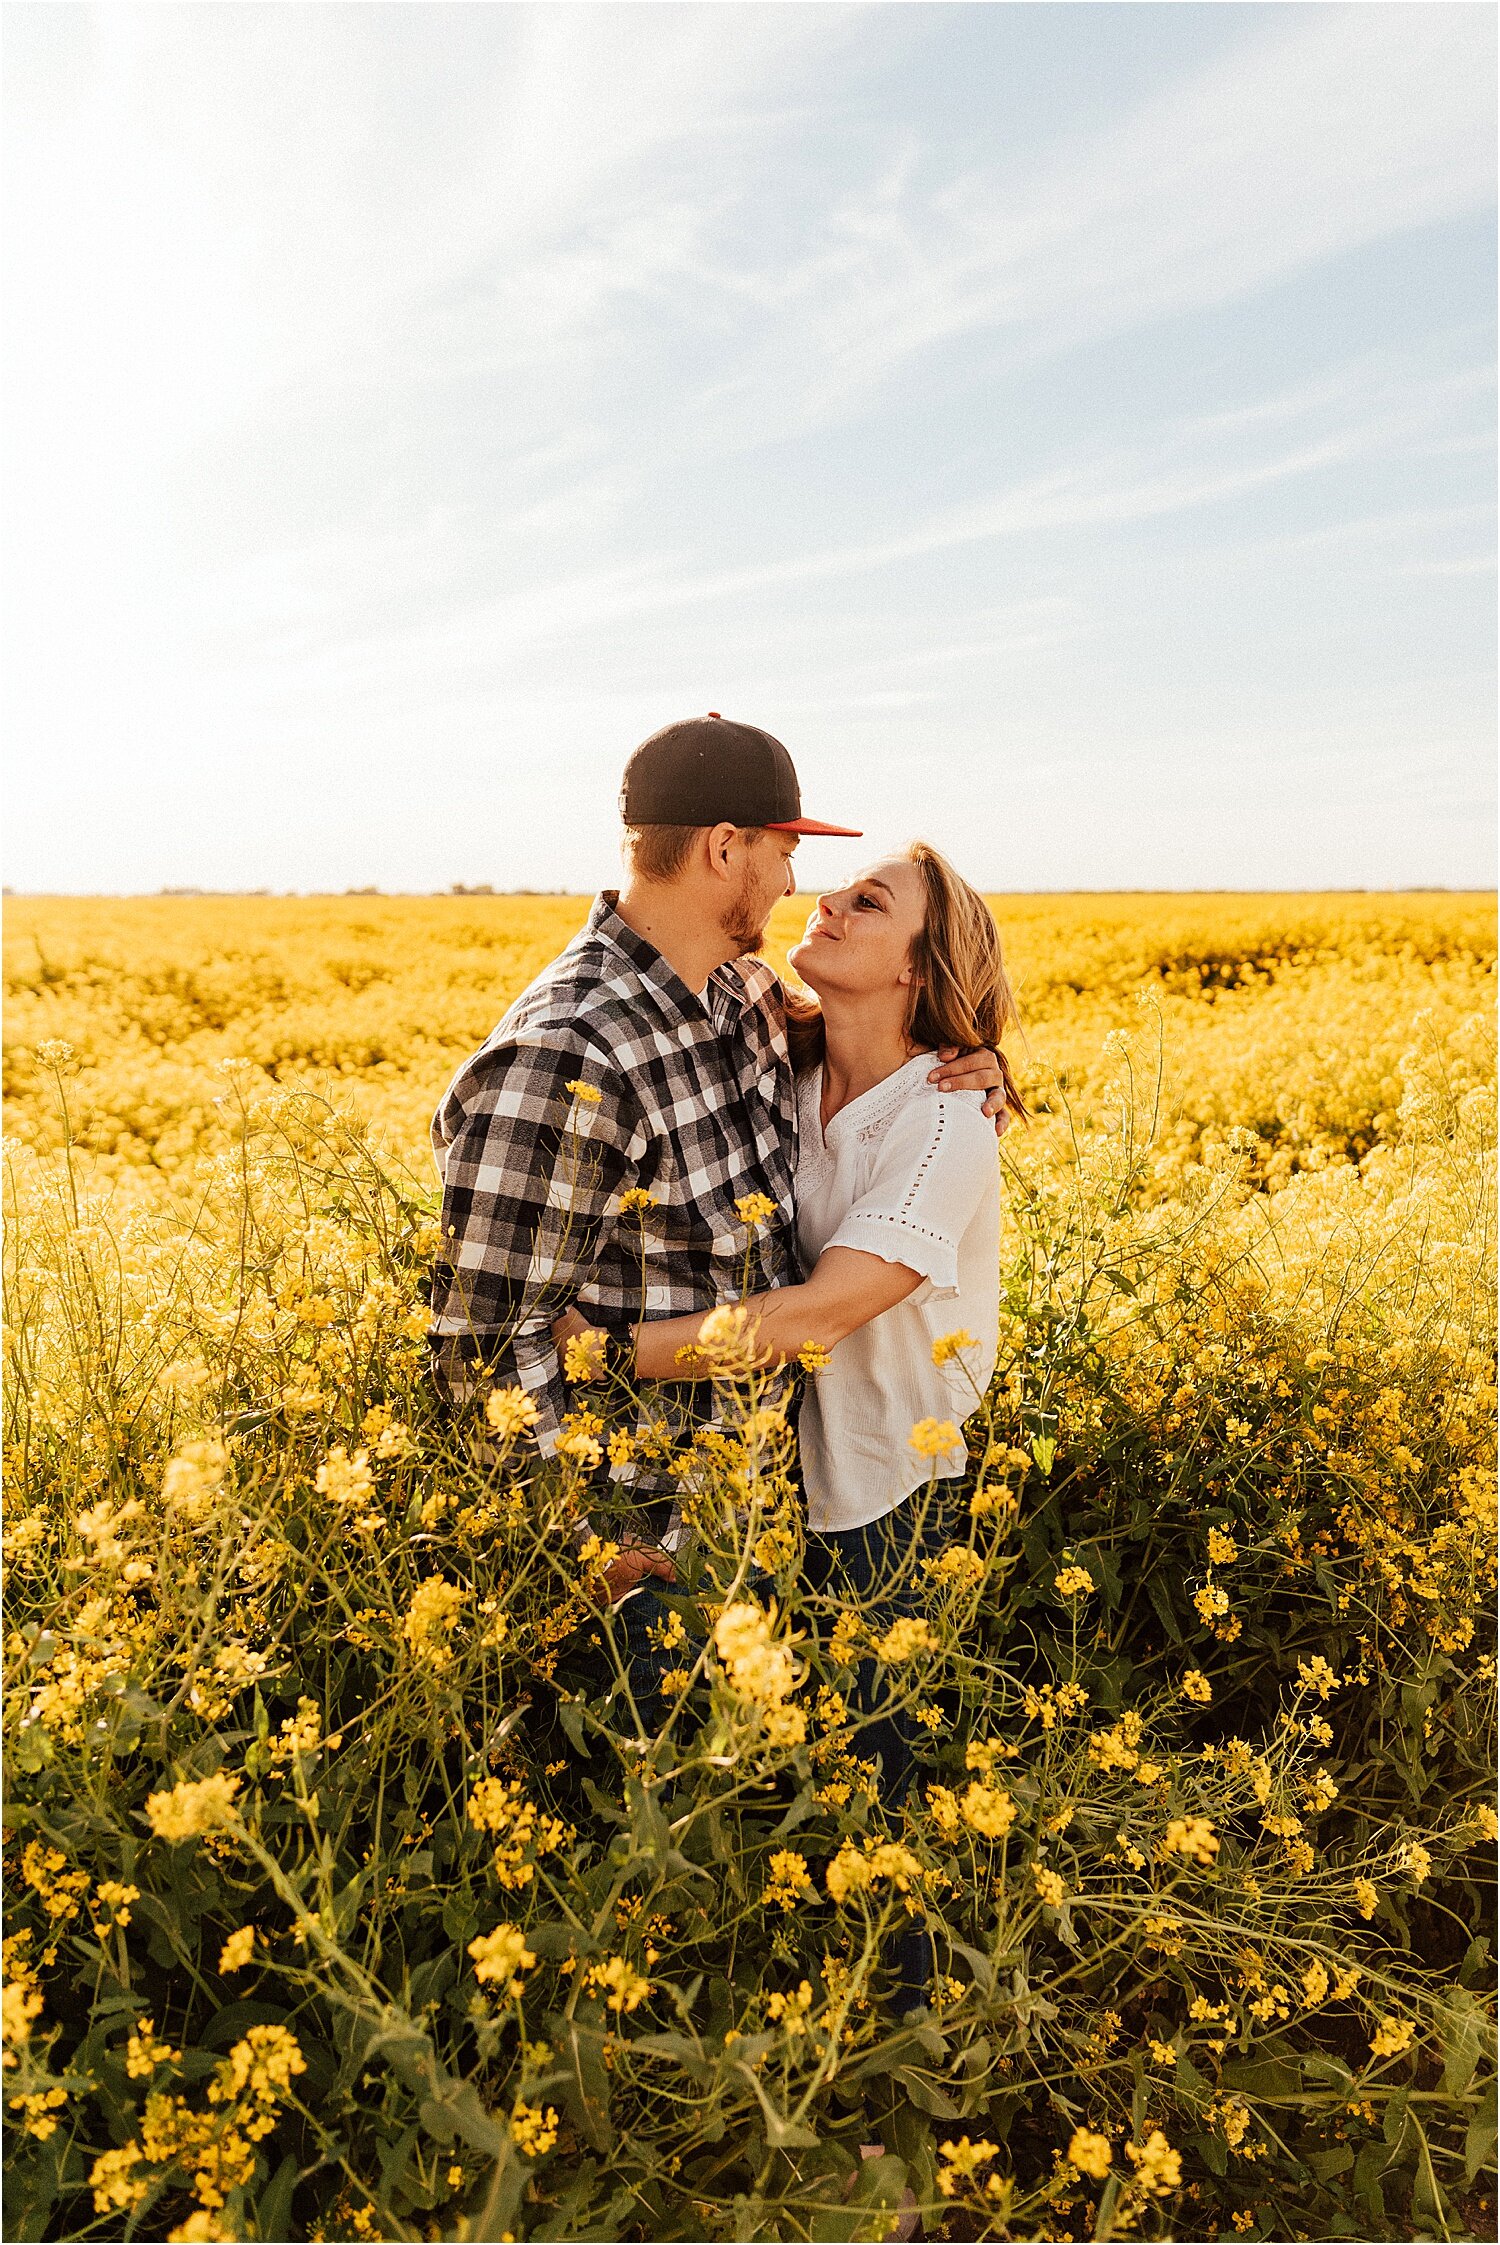 spring field of yellow flowers family session21.jpg